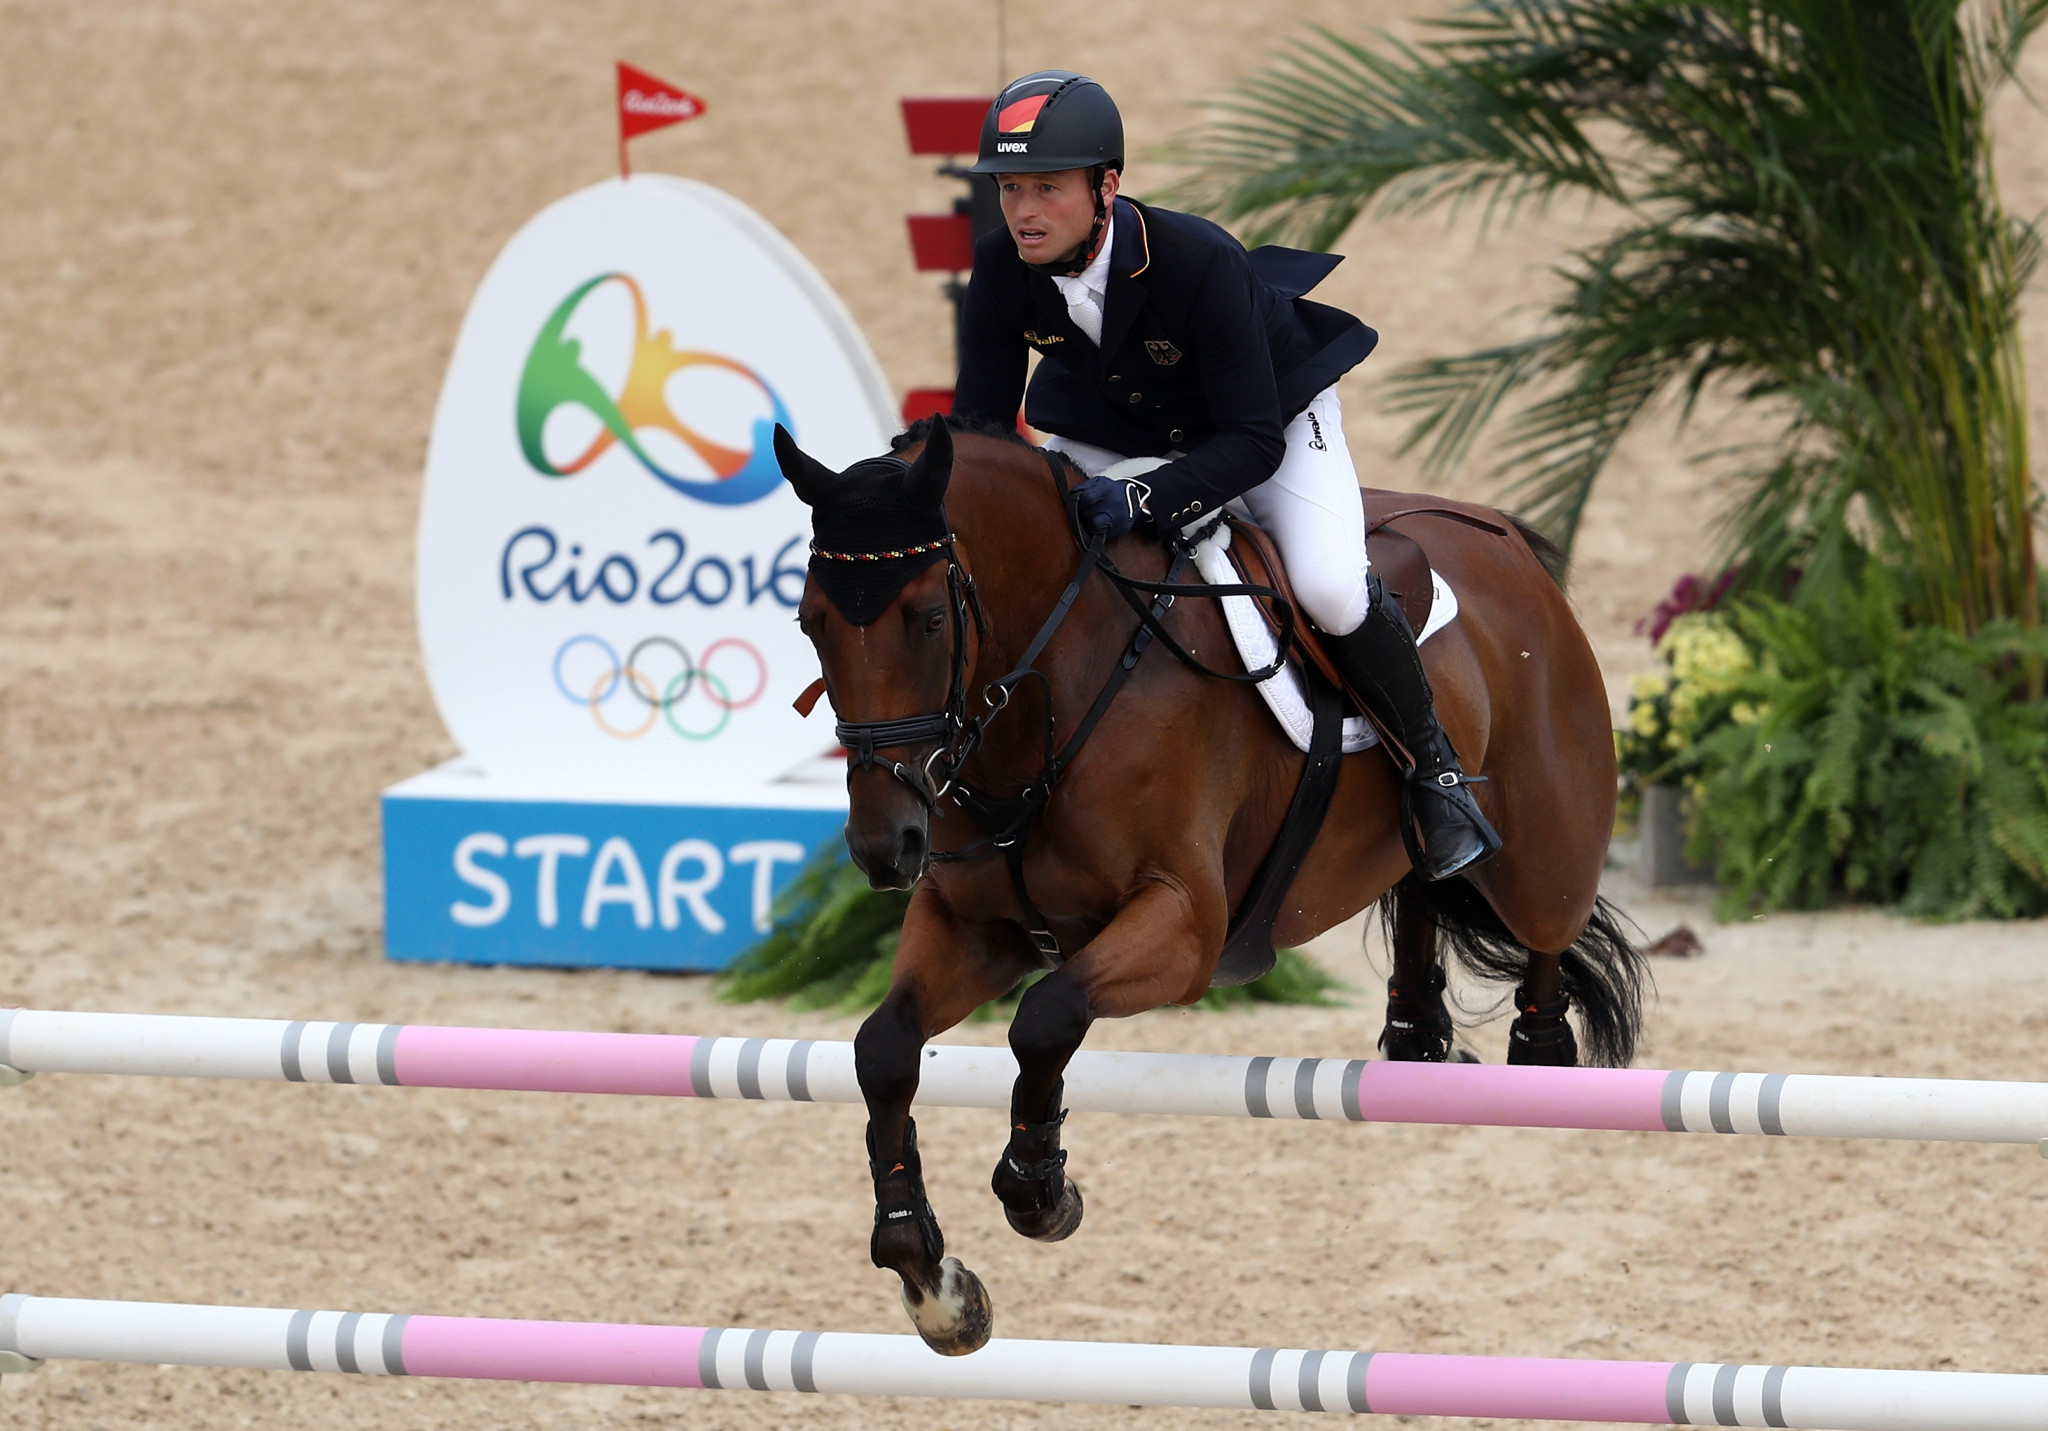 Michael Jung will aim for a third Olympic gold medal in a row at Tokyo 2020  ©Getty Images  